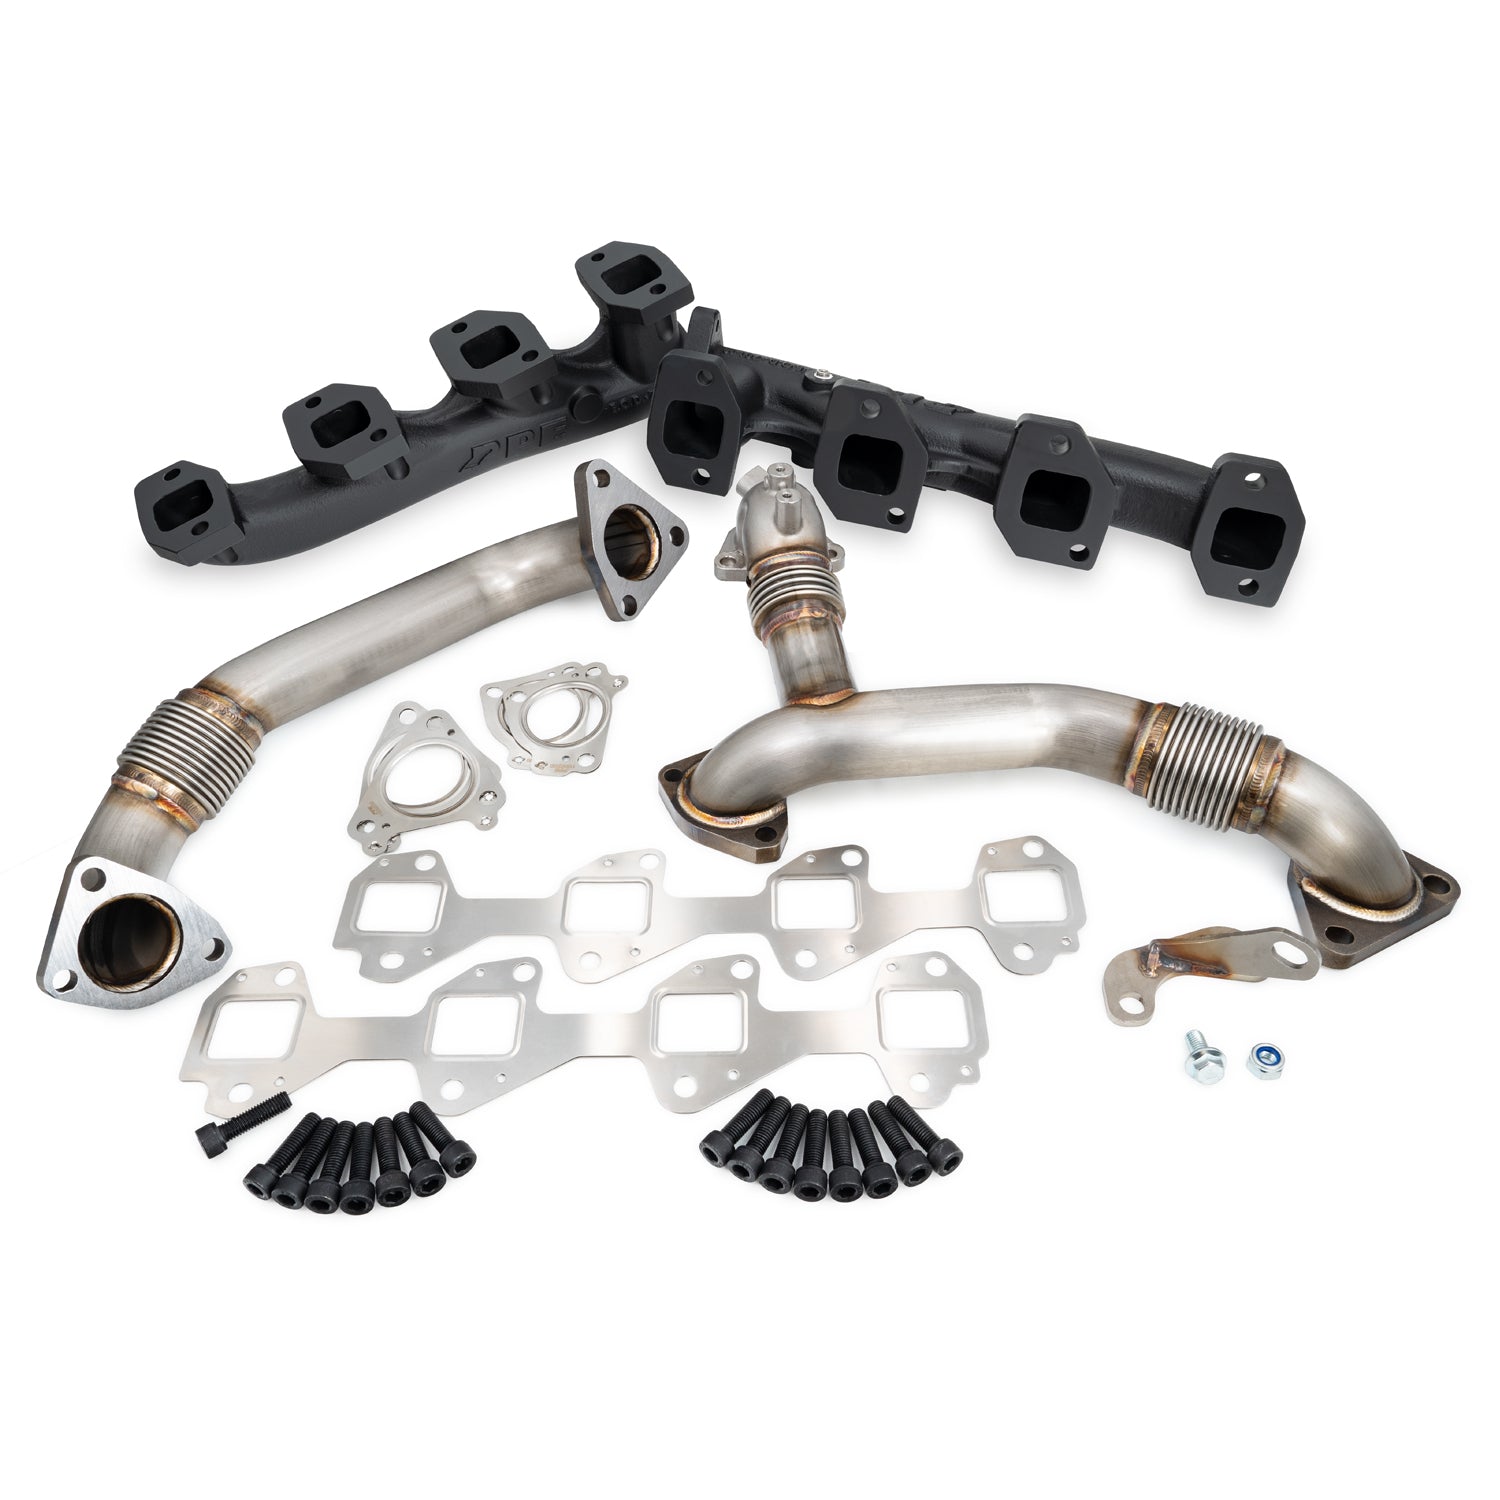 116111235 Manifolds and Up-Pipes GM 2002-2004 CA Y-pipe LB7 - Silver